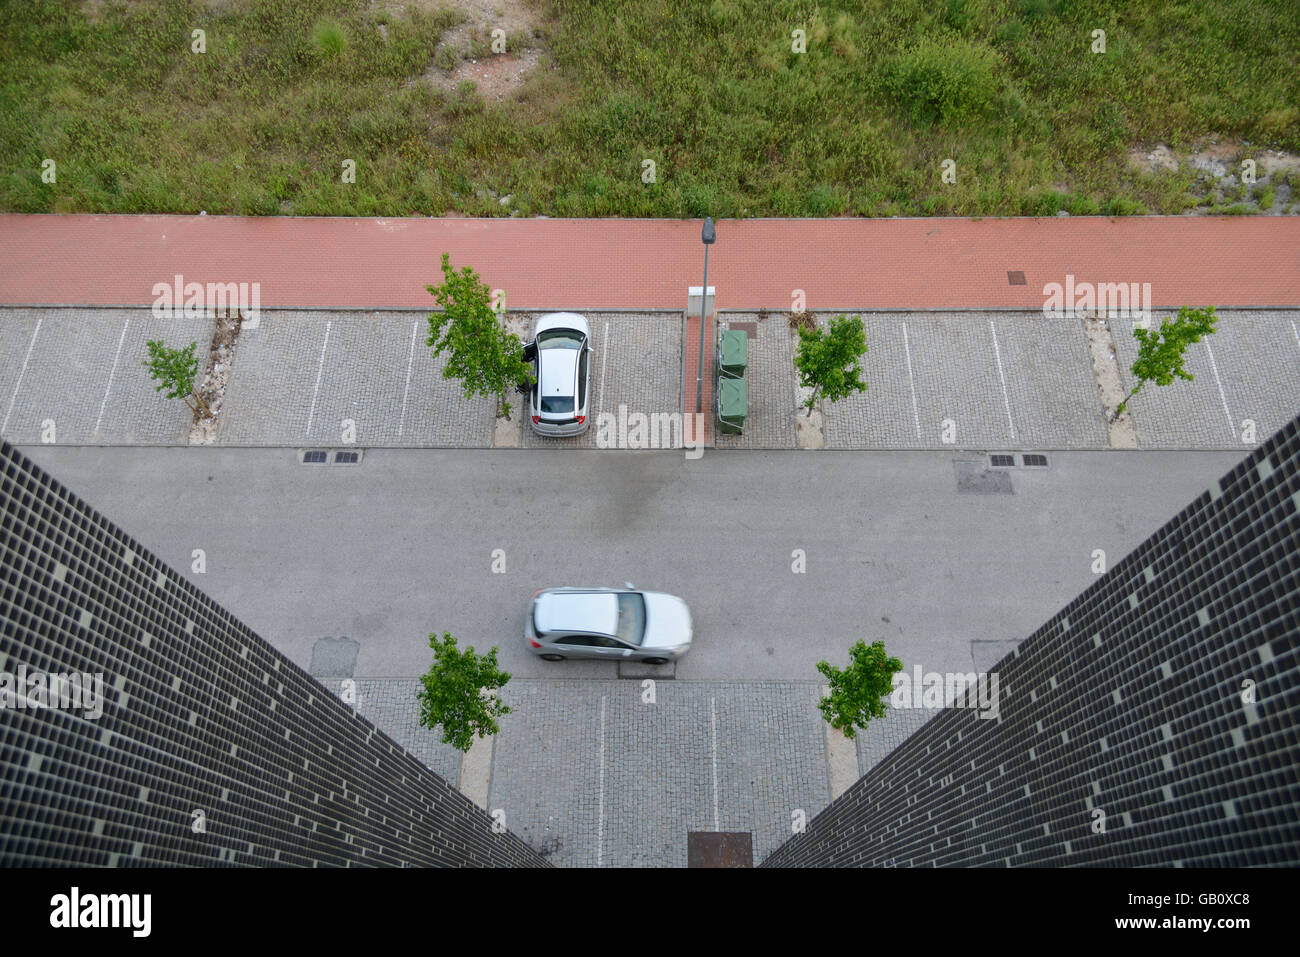 Aerial view of outdoor parking spots Stock Photo